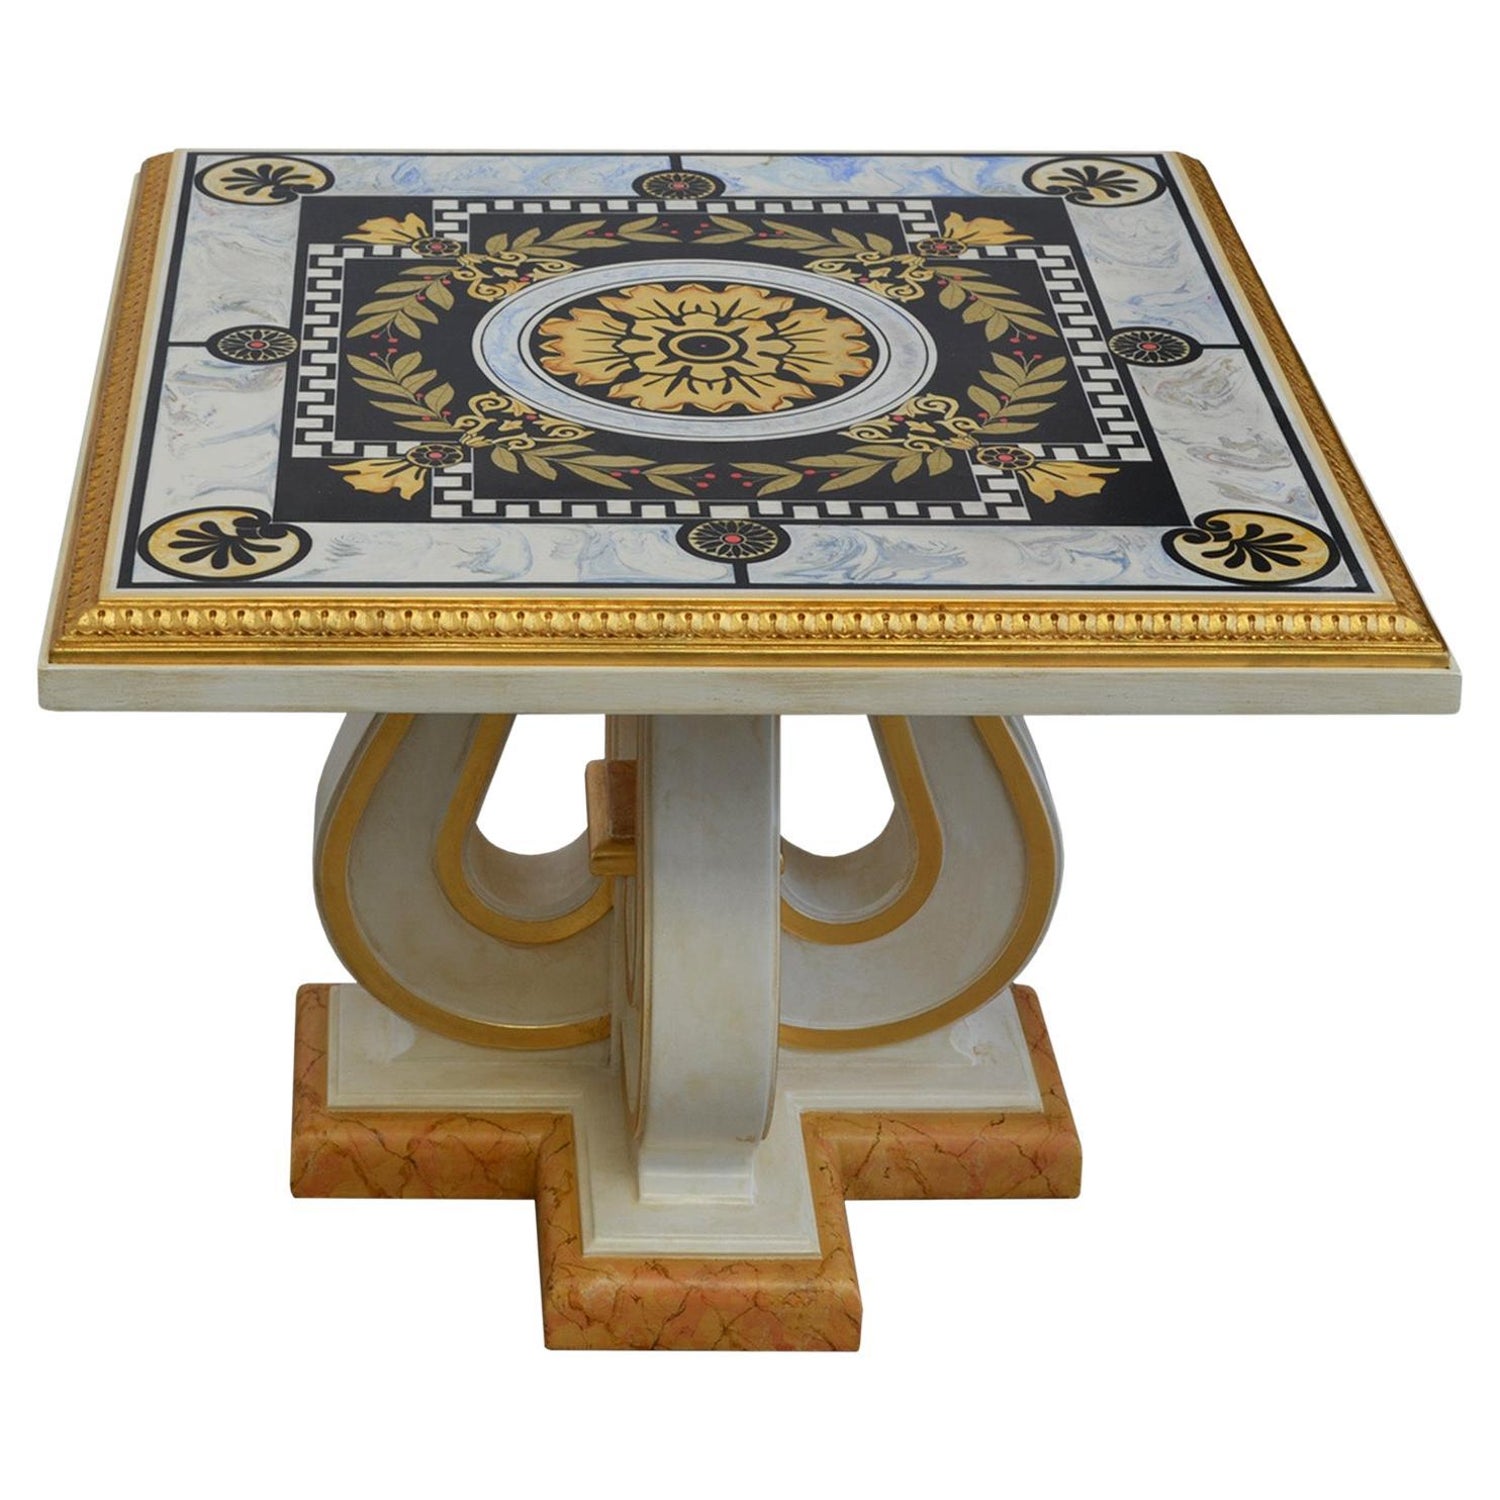 Cupioli Square Coffee Table Scagliola Art Top wooden base Handmade in Italy  For Sale at 1stDibs